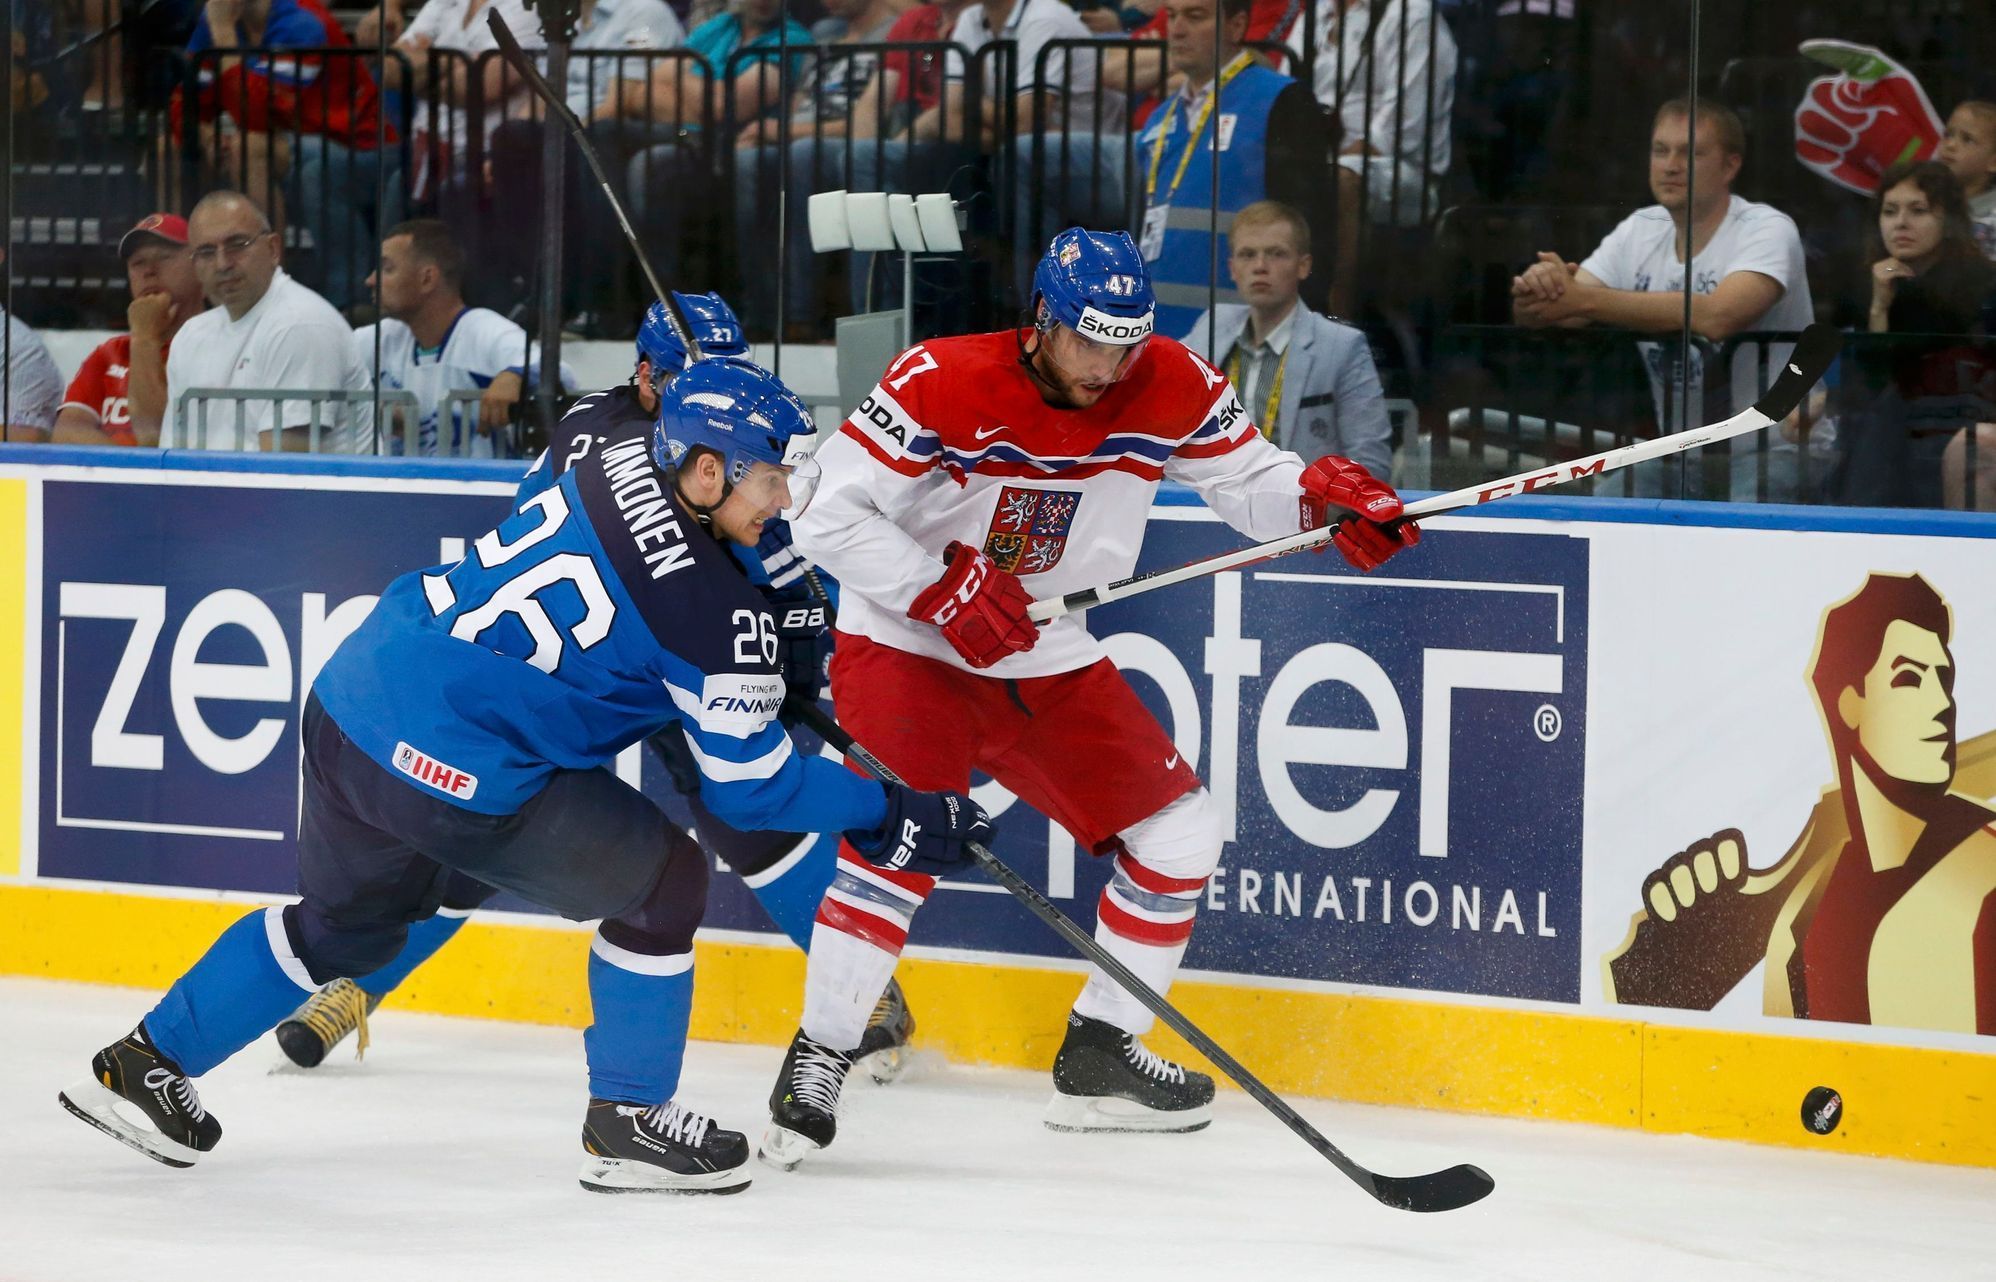 Finland's Immonen and Jordan of the Czech Republic chase the puck during their men's ice hockey World Championship semi-final game at Minsk Arena in Minsk